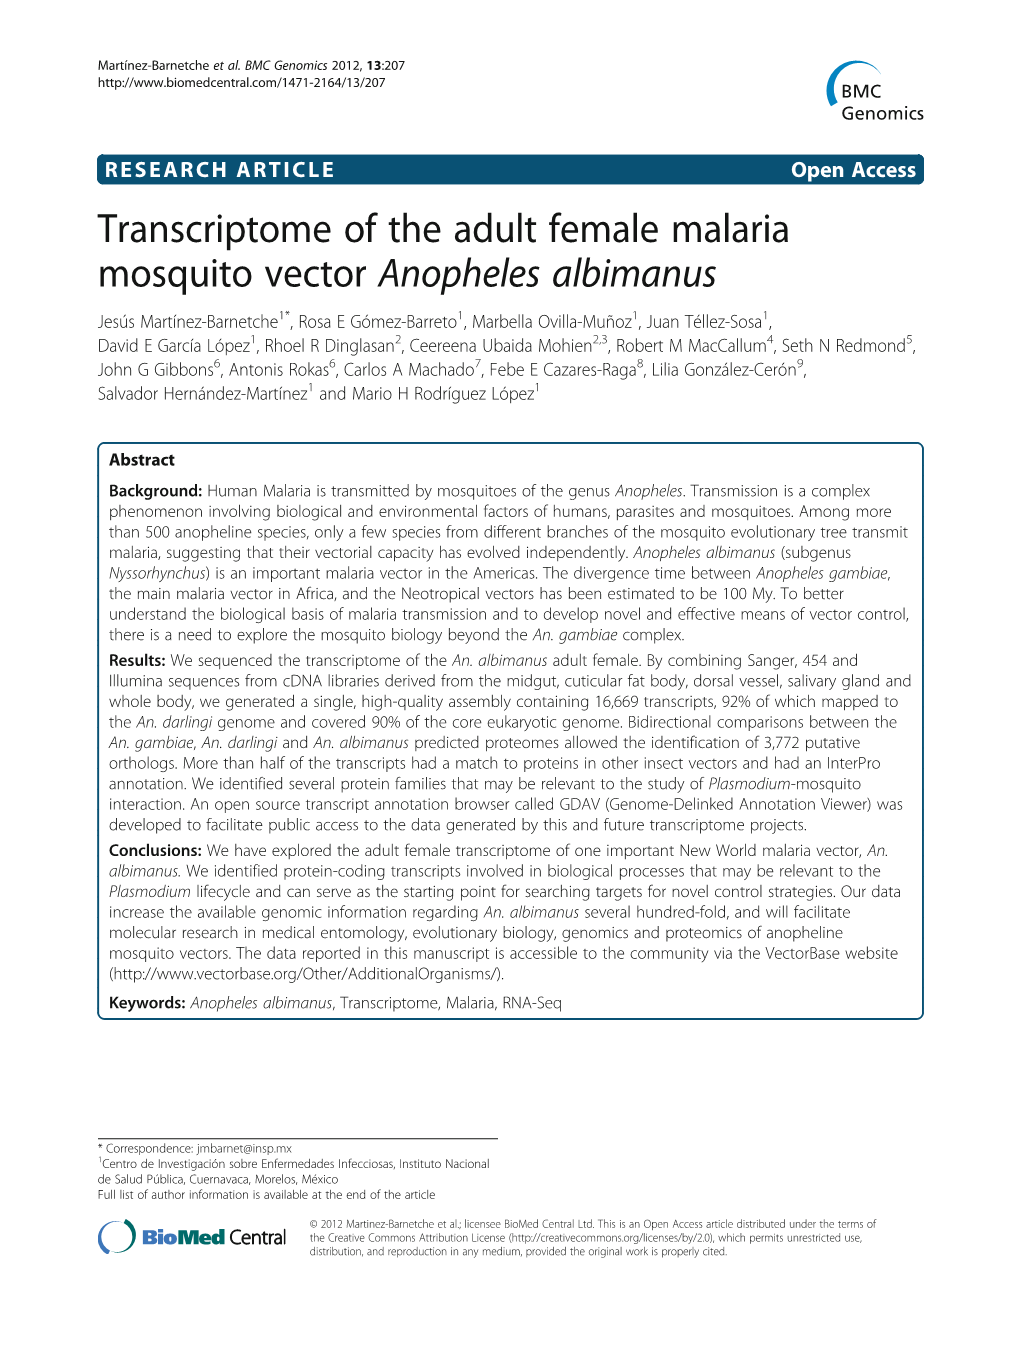 Transcriptome of the Adult Female Malaria Mosquito Vector Anopheles